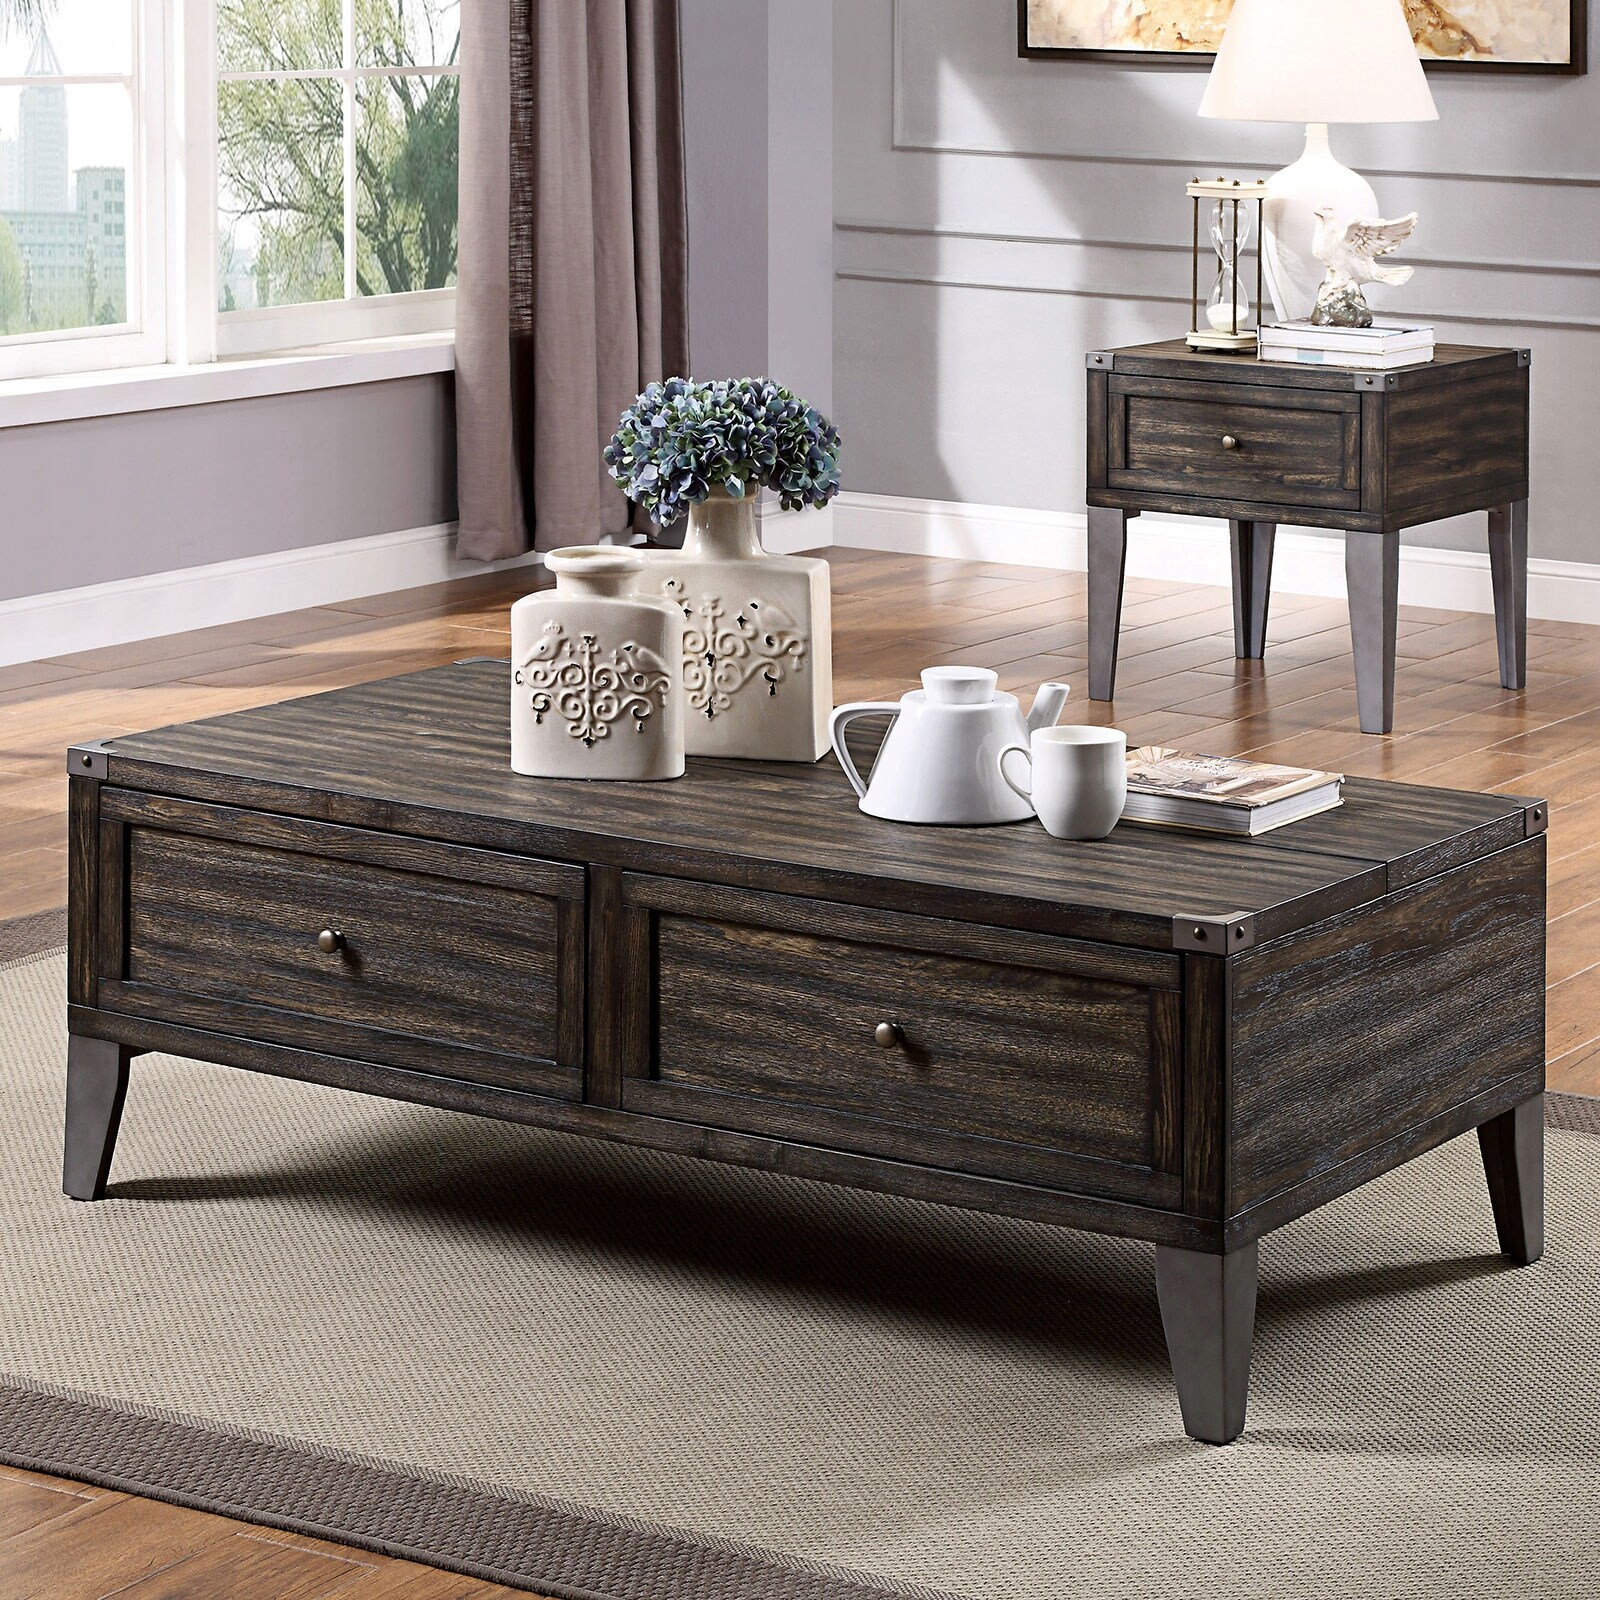 Lift-top Design Coffee Table with Storage Drawers, Dark Oak -  Simple Relax, SR03CM4387C